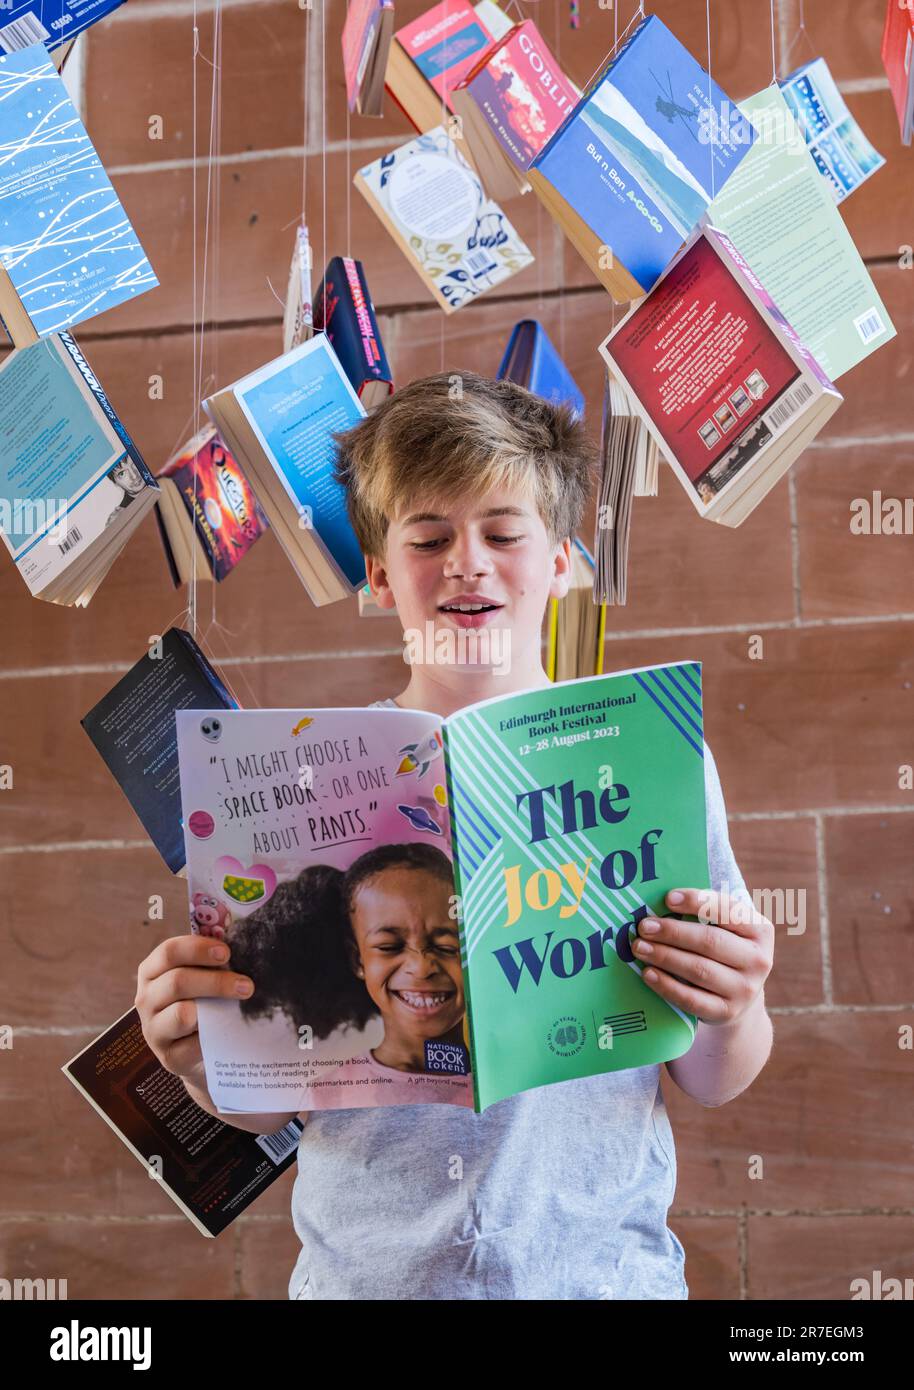 A 12 year old boy reads the Edinburgh International Book Festival 2023 programme surrounded by paperback books for programme launch, Scotland, UK Stock Photo